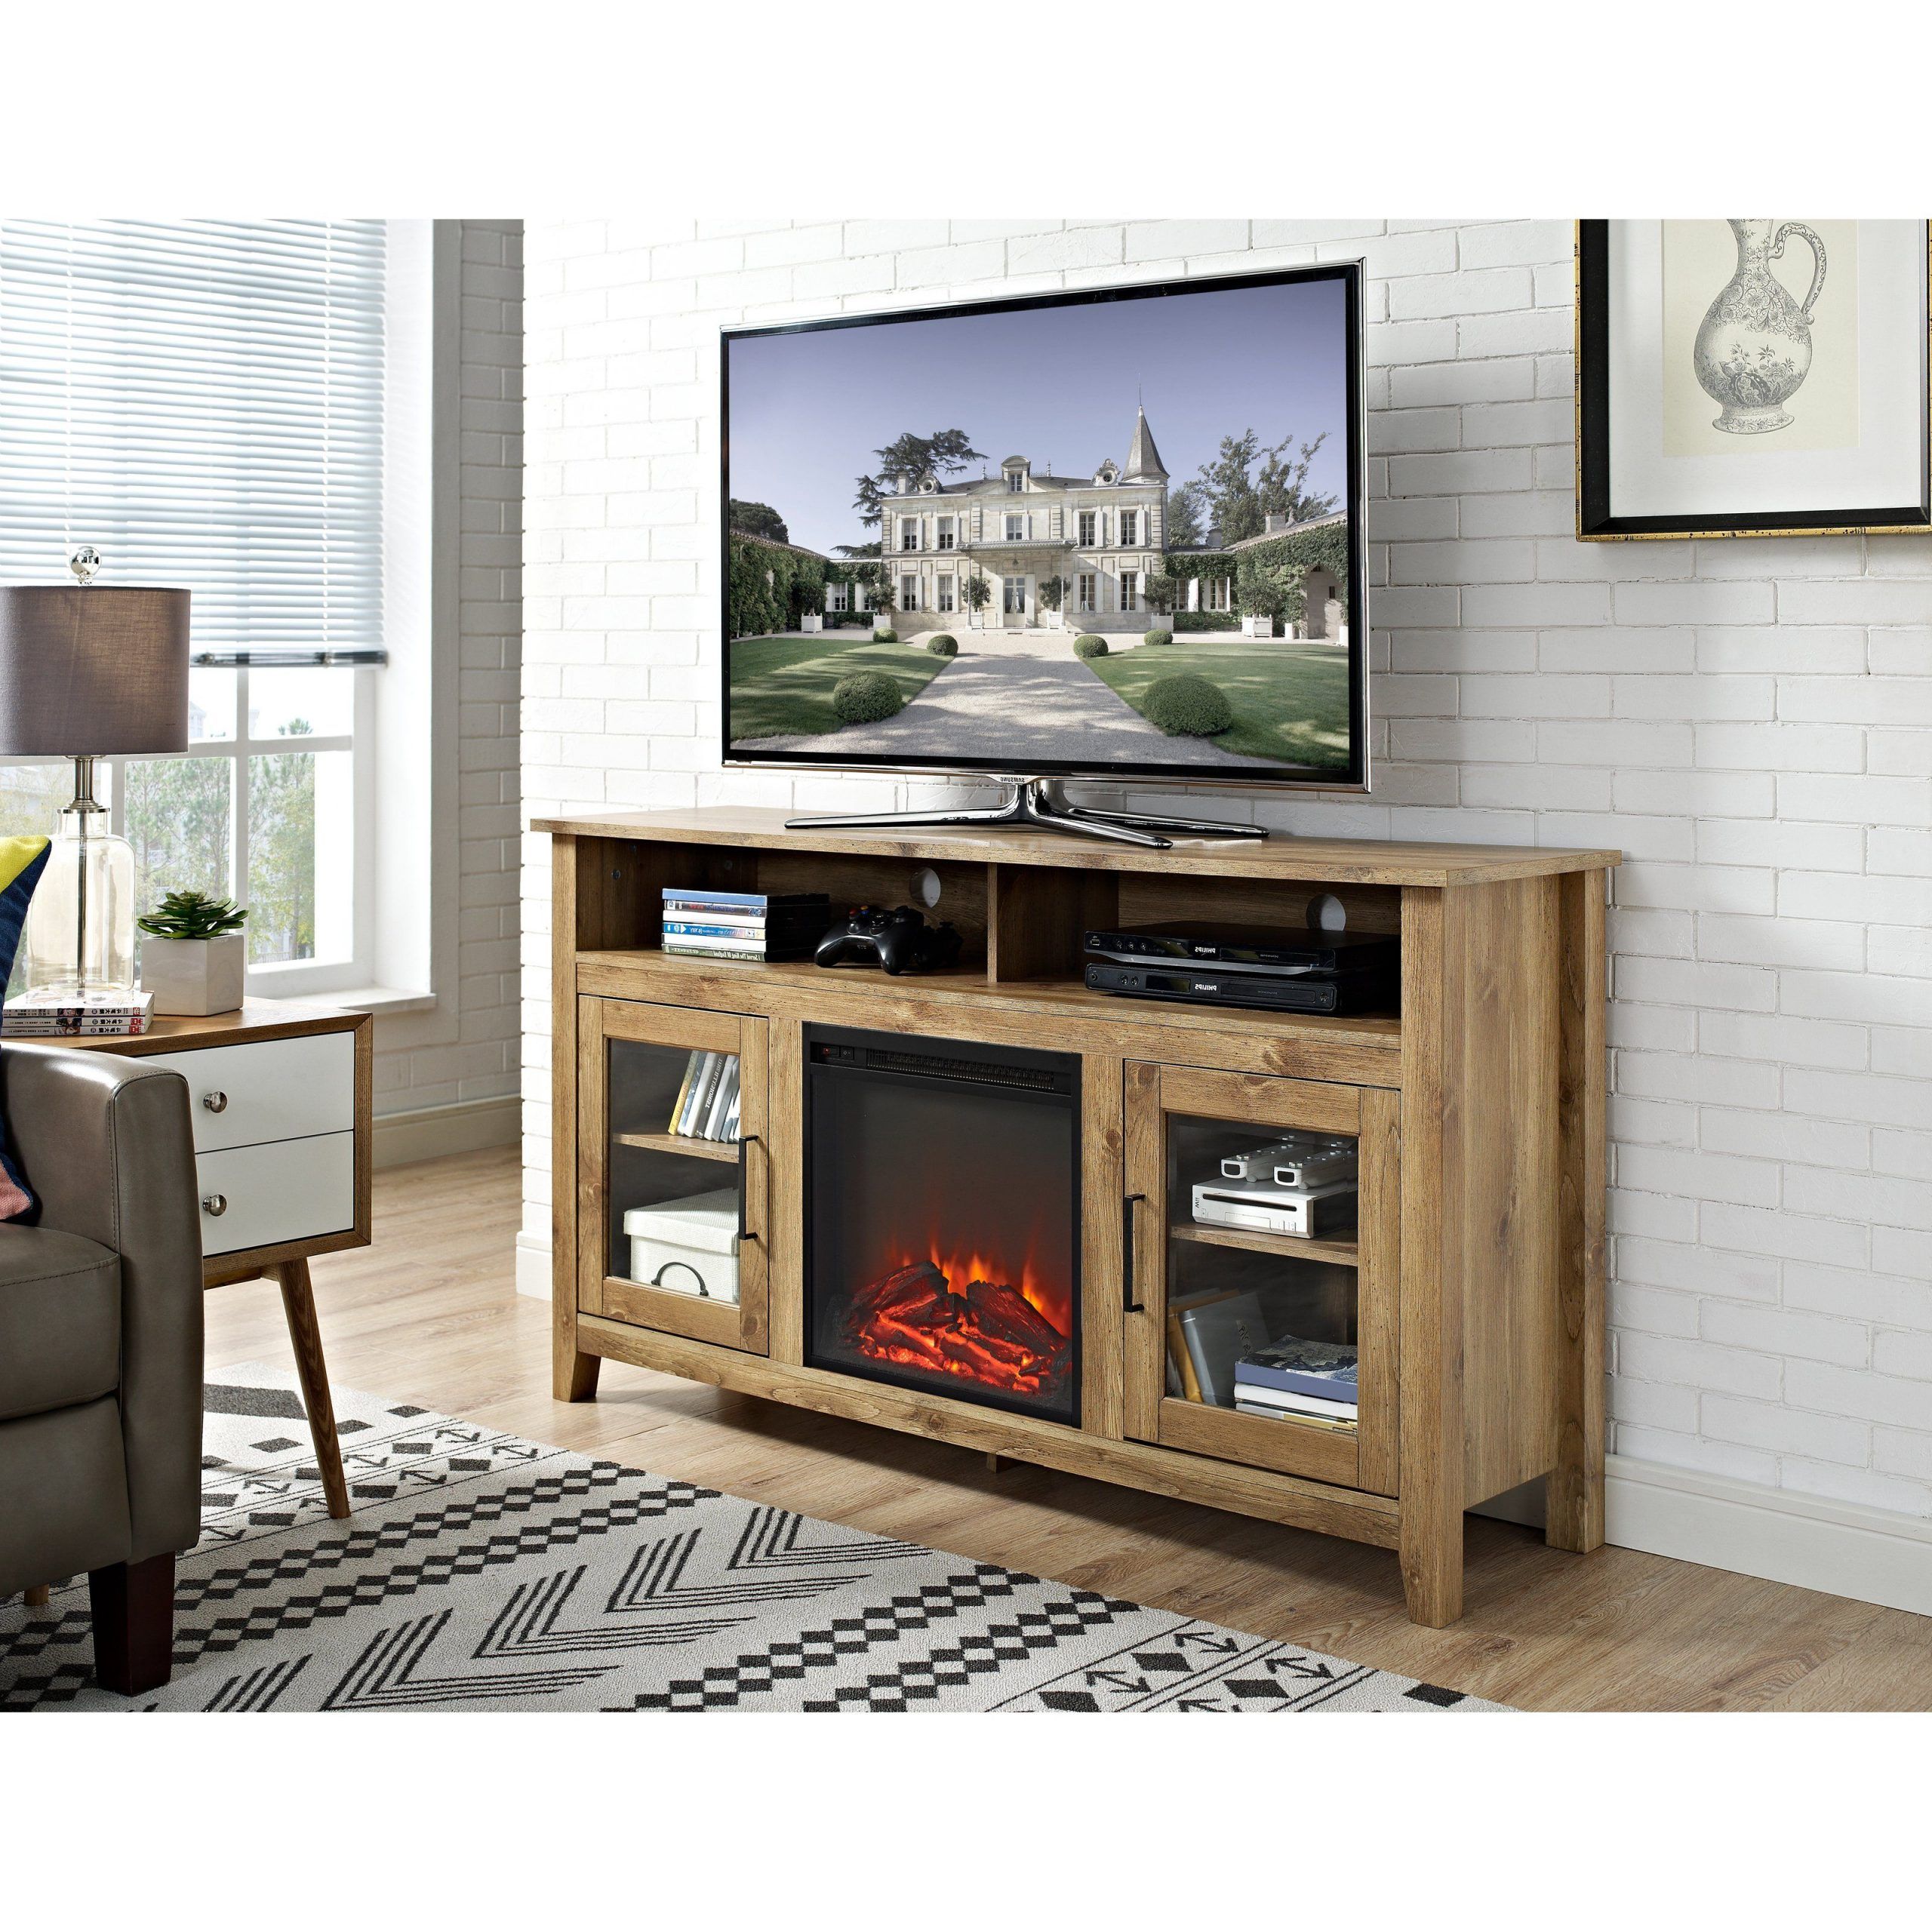 Walker Edison 58 In. Wood Highboy Fireplace Media Tv Stand Pertaining To Walker Edison Wood Tv Media Storage Stands In Black (Gallery 12 of 20)